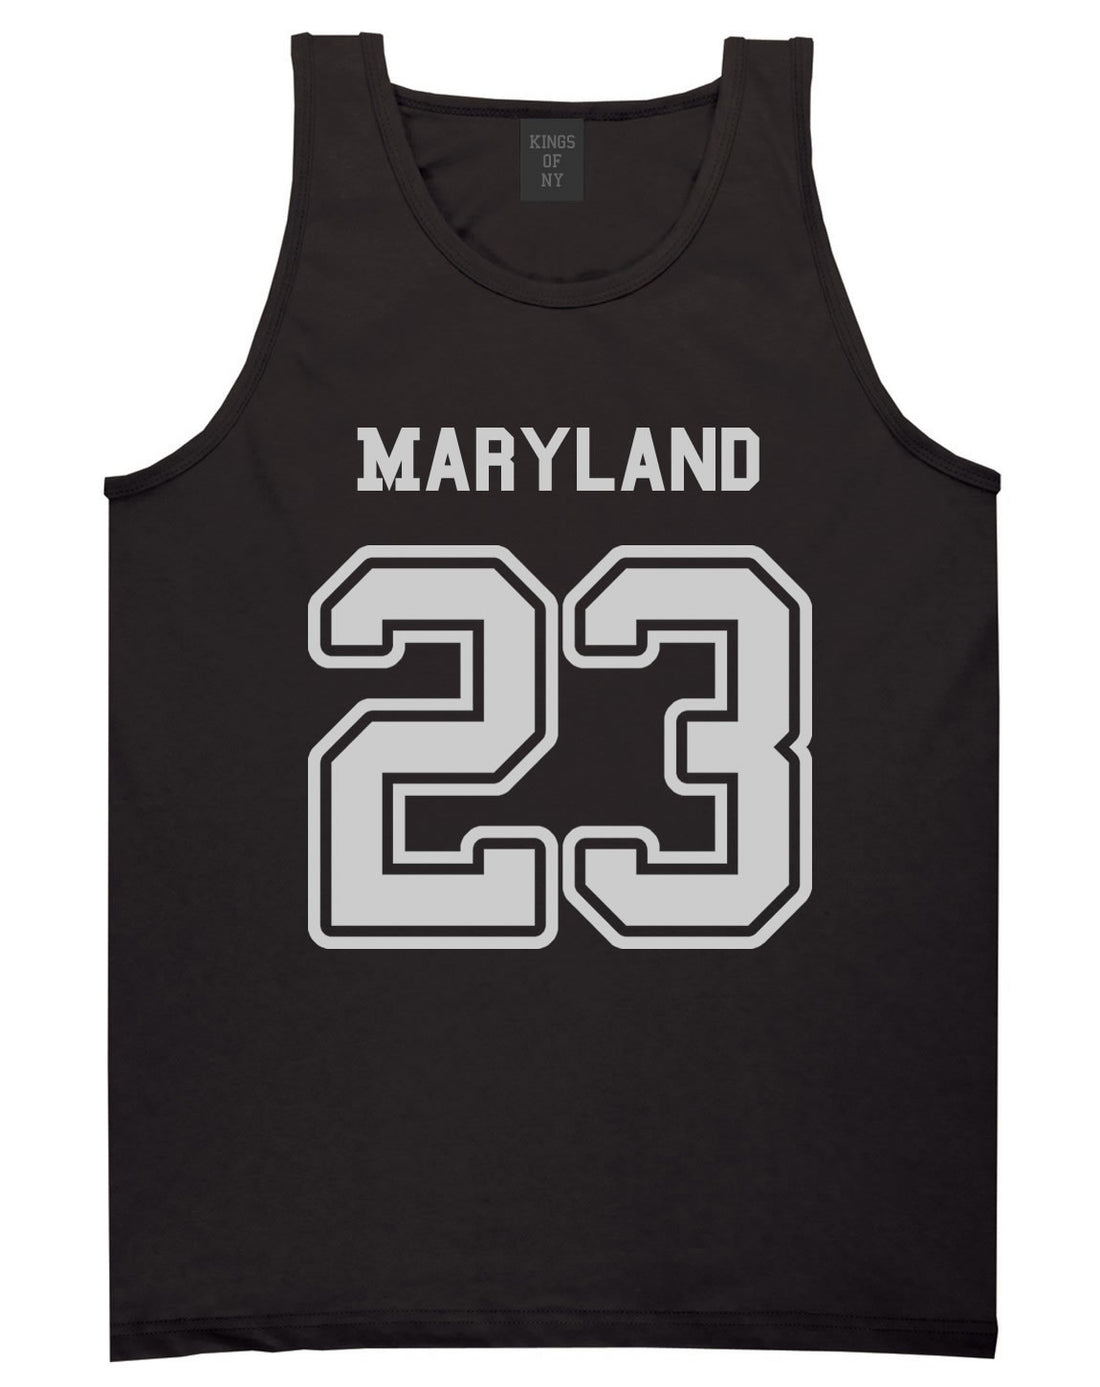 Sport Style Maryland 23 Team State Jersey Mens Tank Top By Kings Of NY